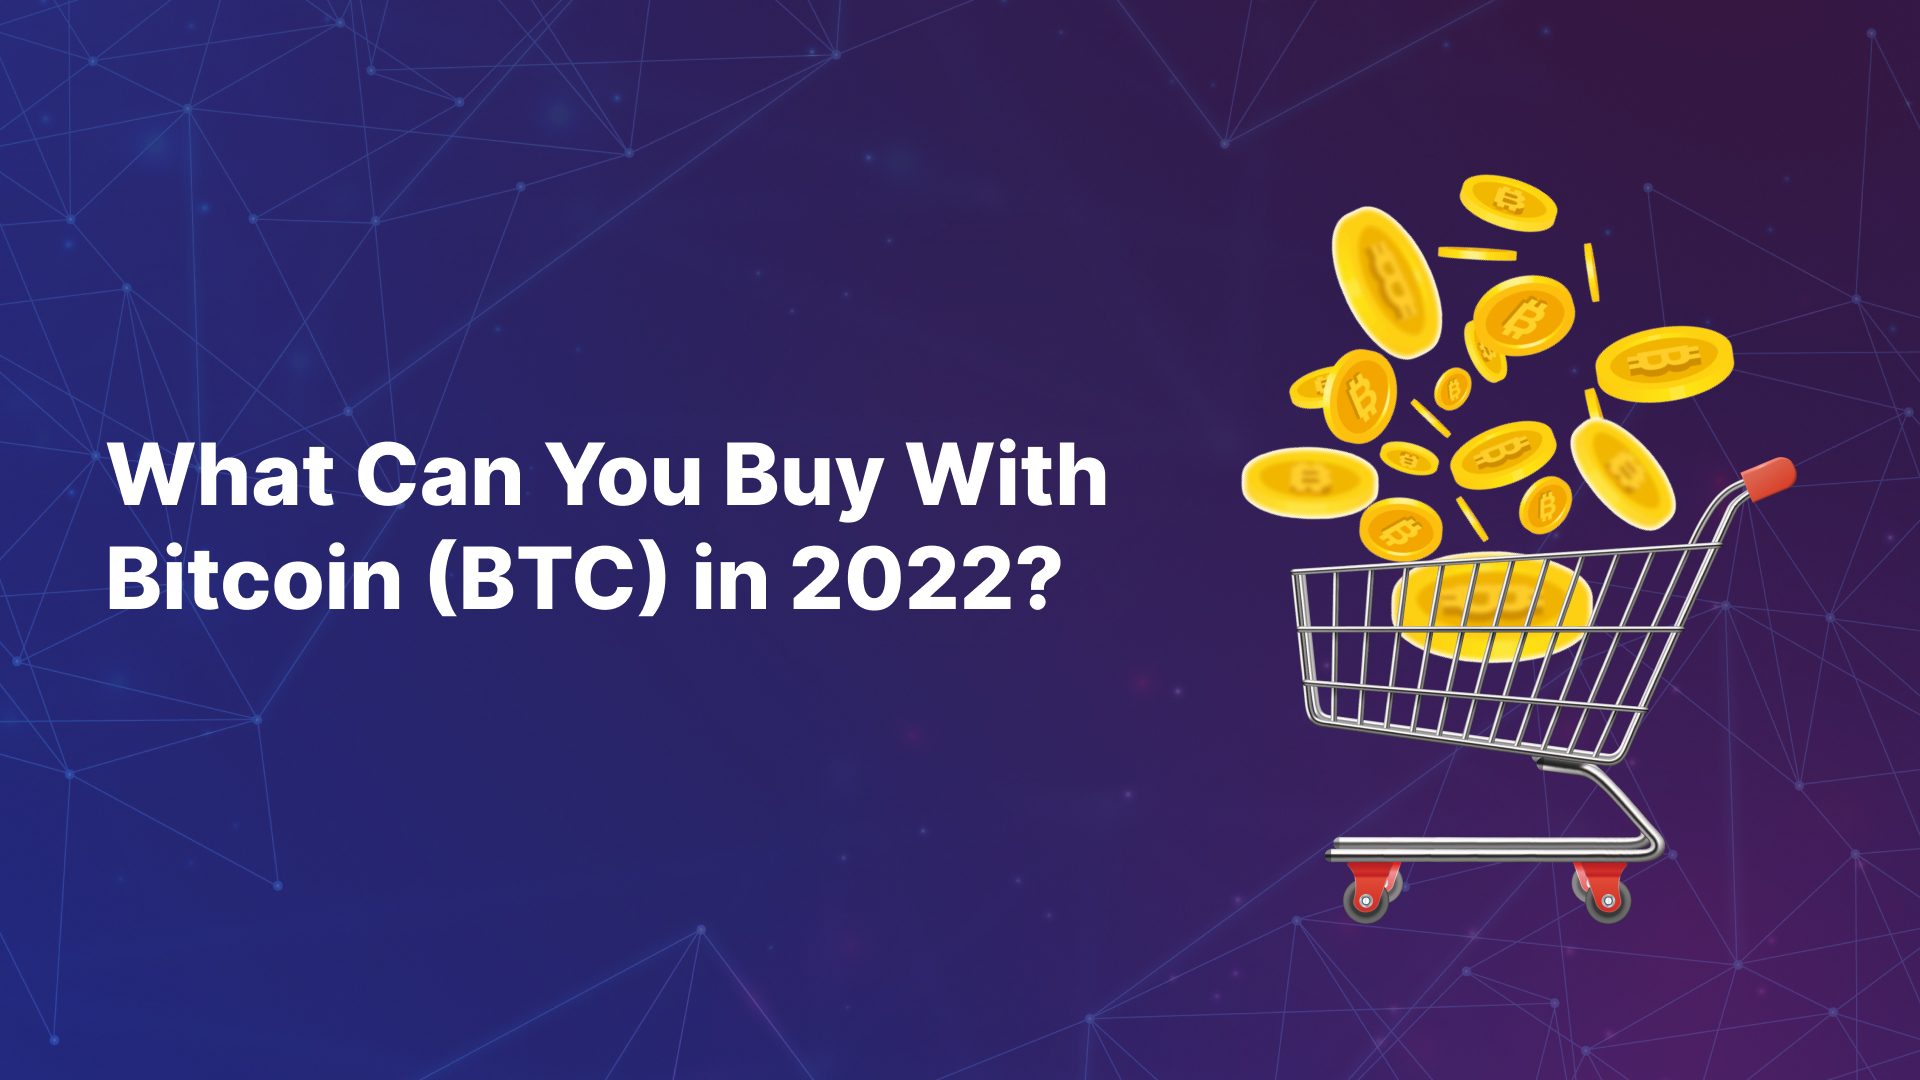 What Can You Buy With Bitcoin (BTC) in 2022?